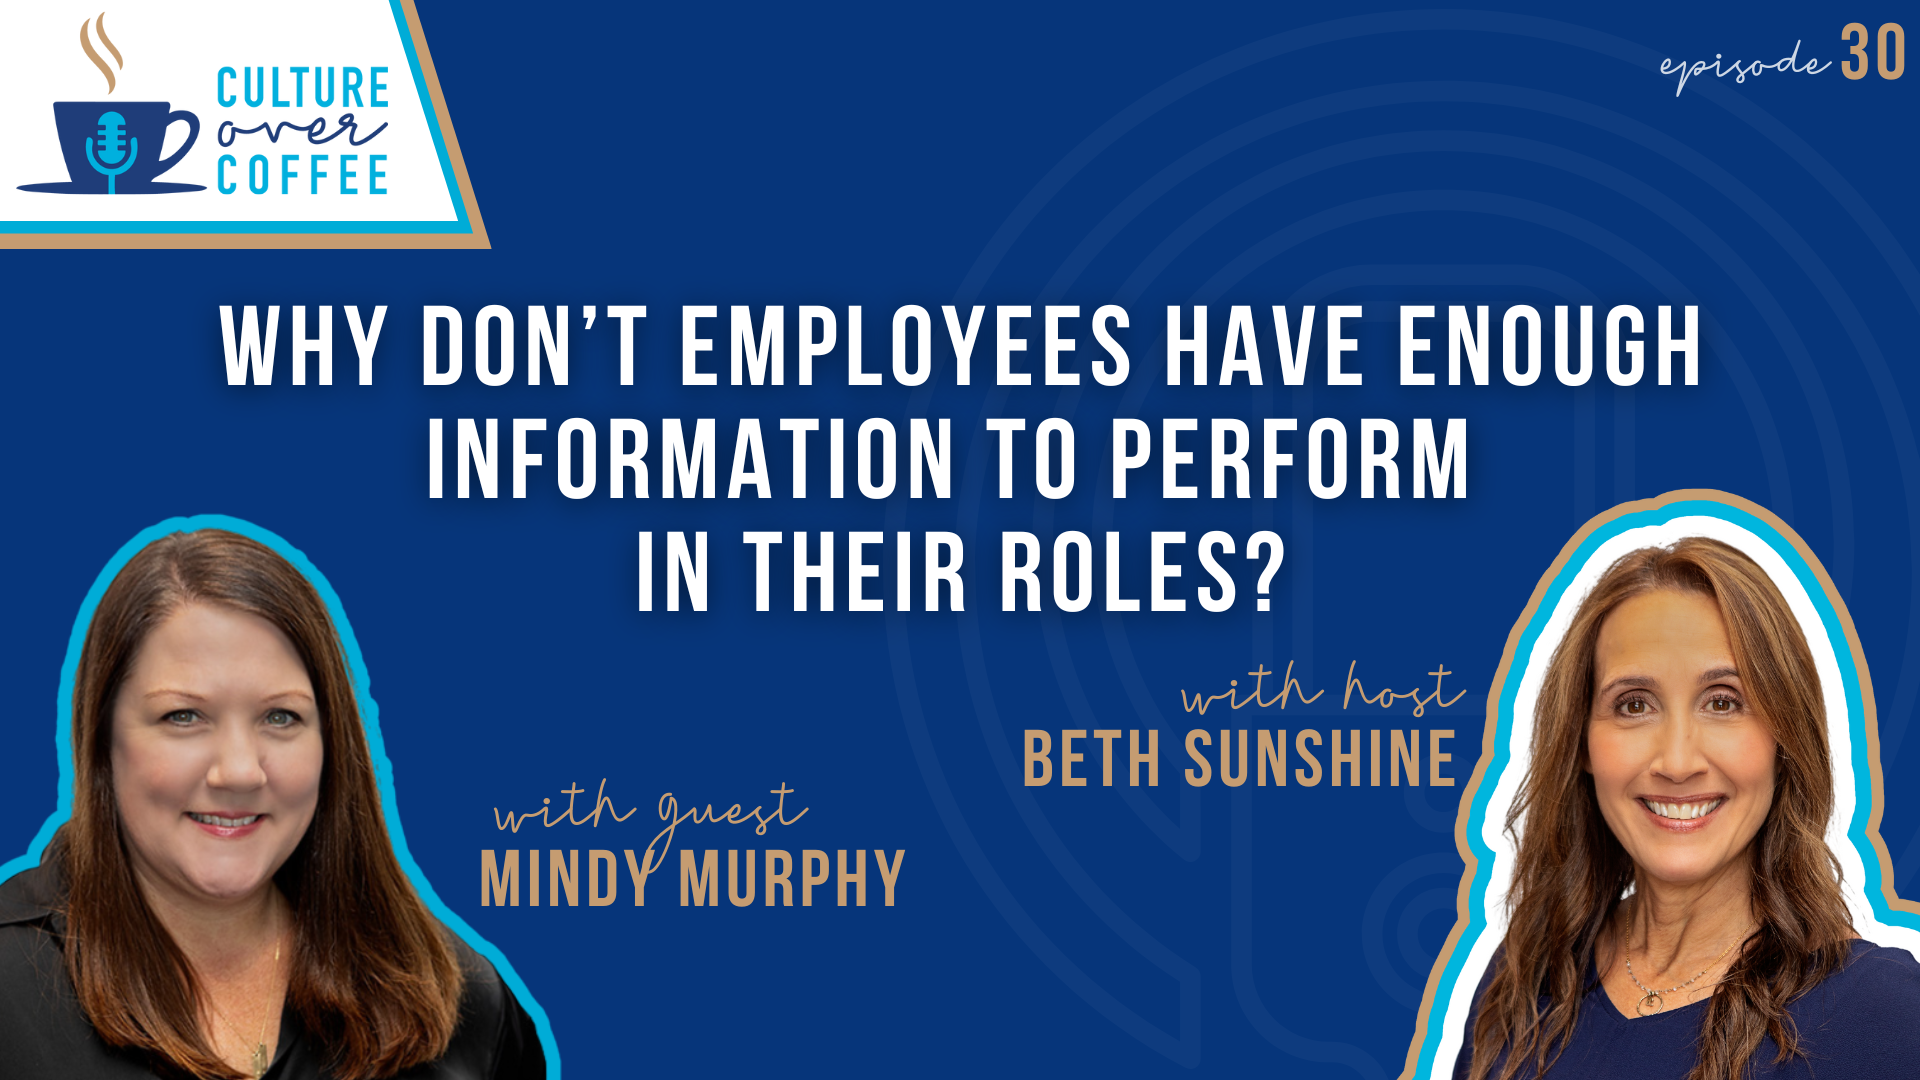 Why Don’t Employees Have Enough Information to Perform in Their Roles? With Mindy Murphy